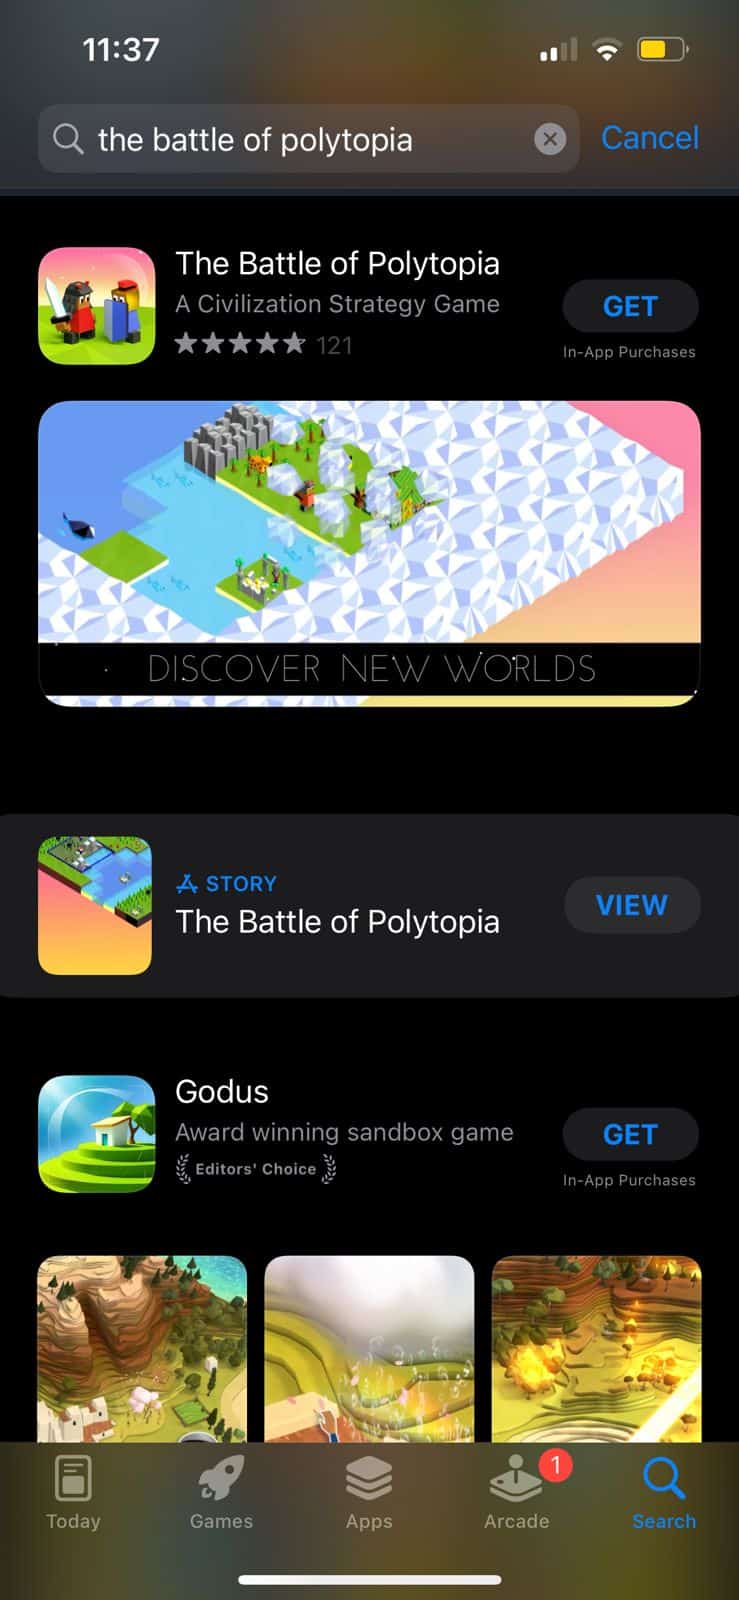 The Battle of Polytopia on app store | Google Play games on iPhone